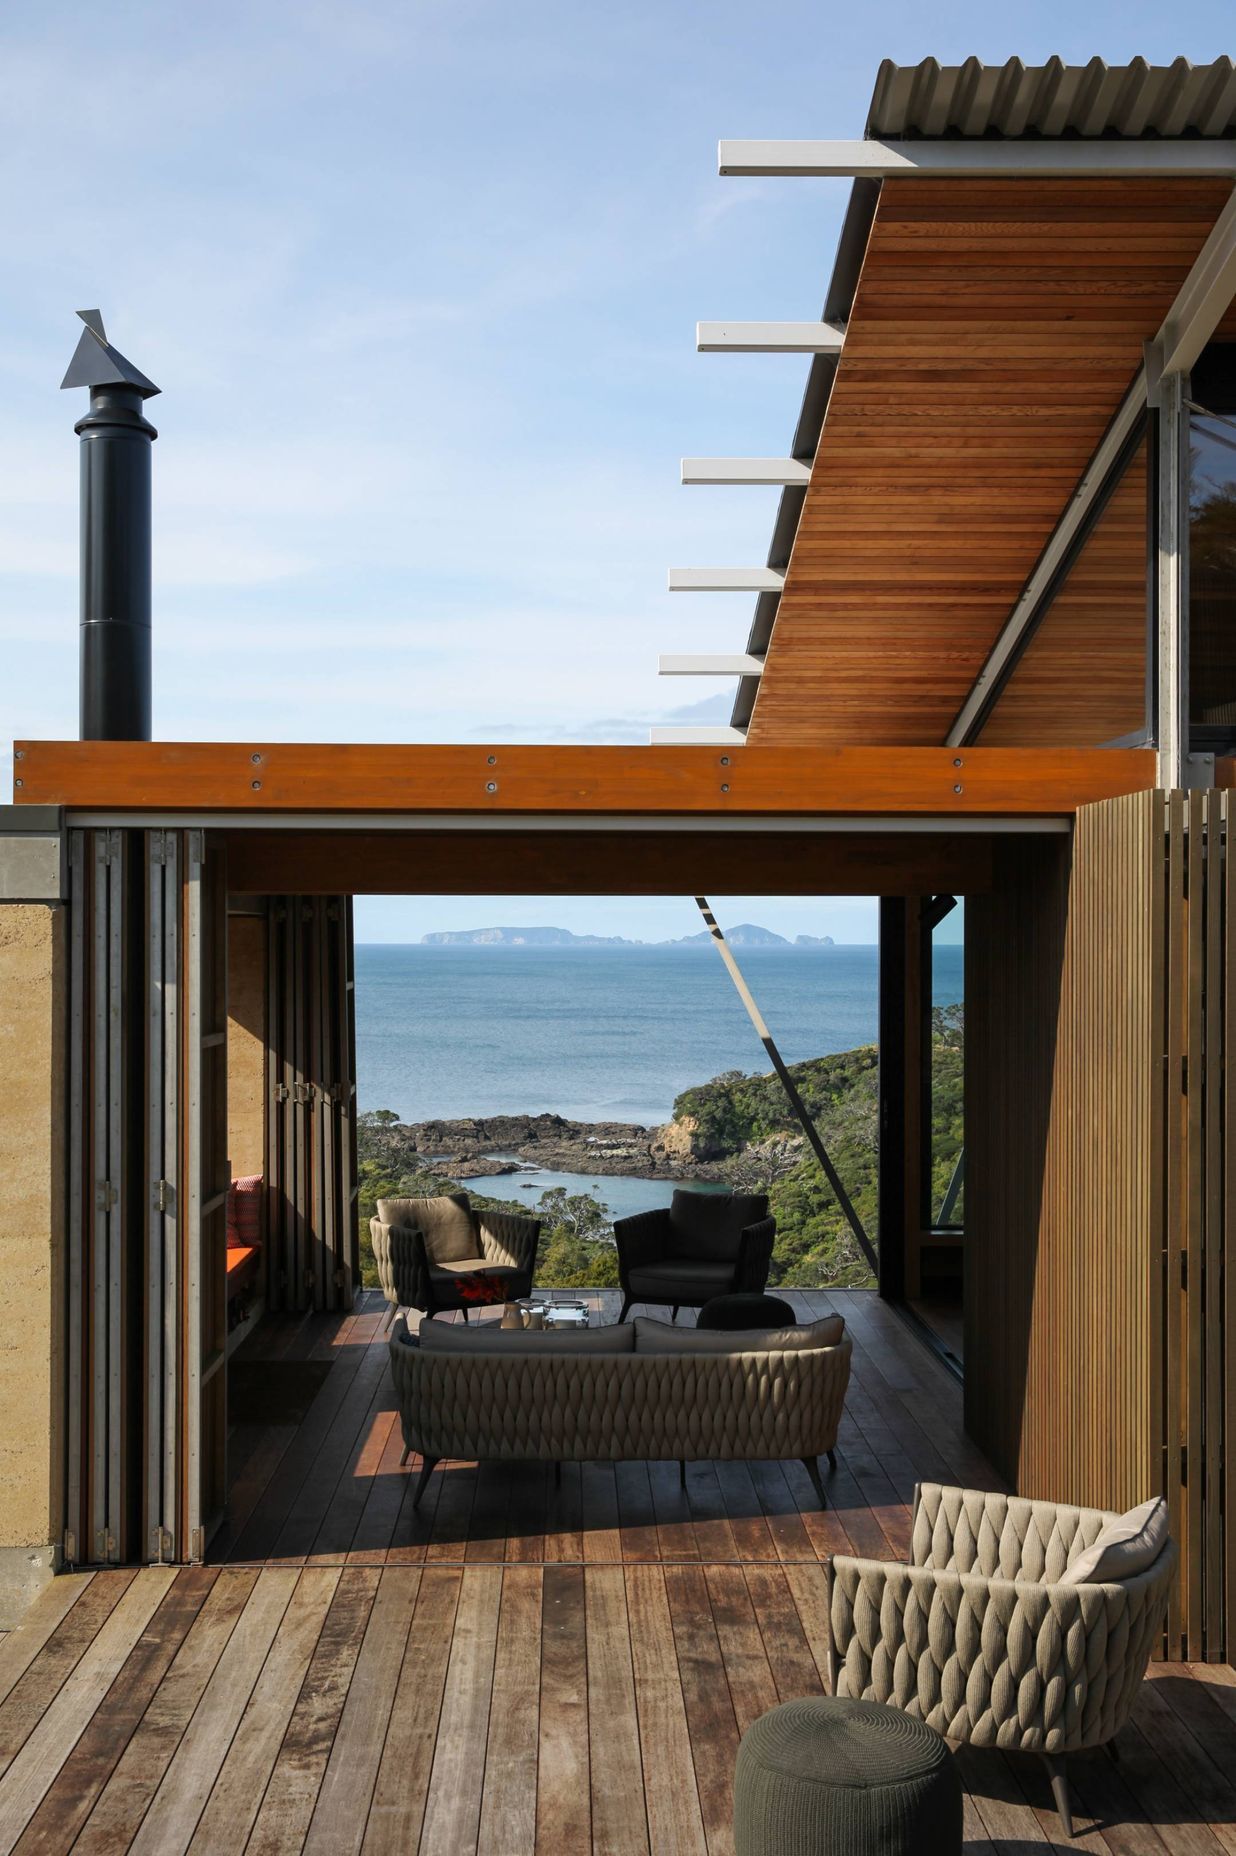 The outdoor room looks straight out over the islands. Photograph by Jackie Meiring.